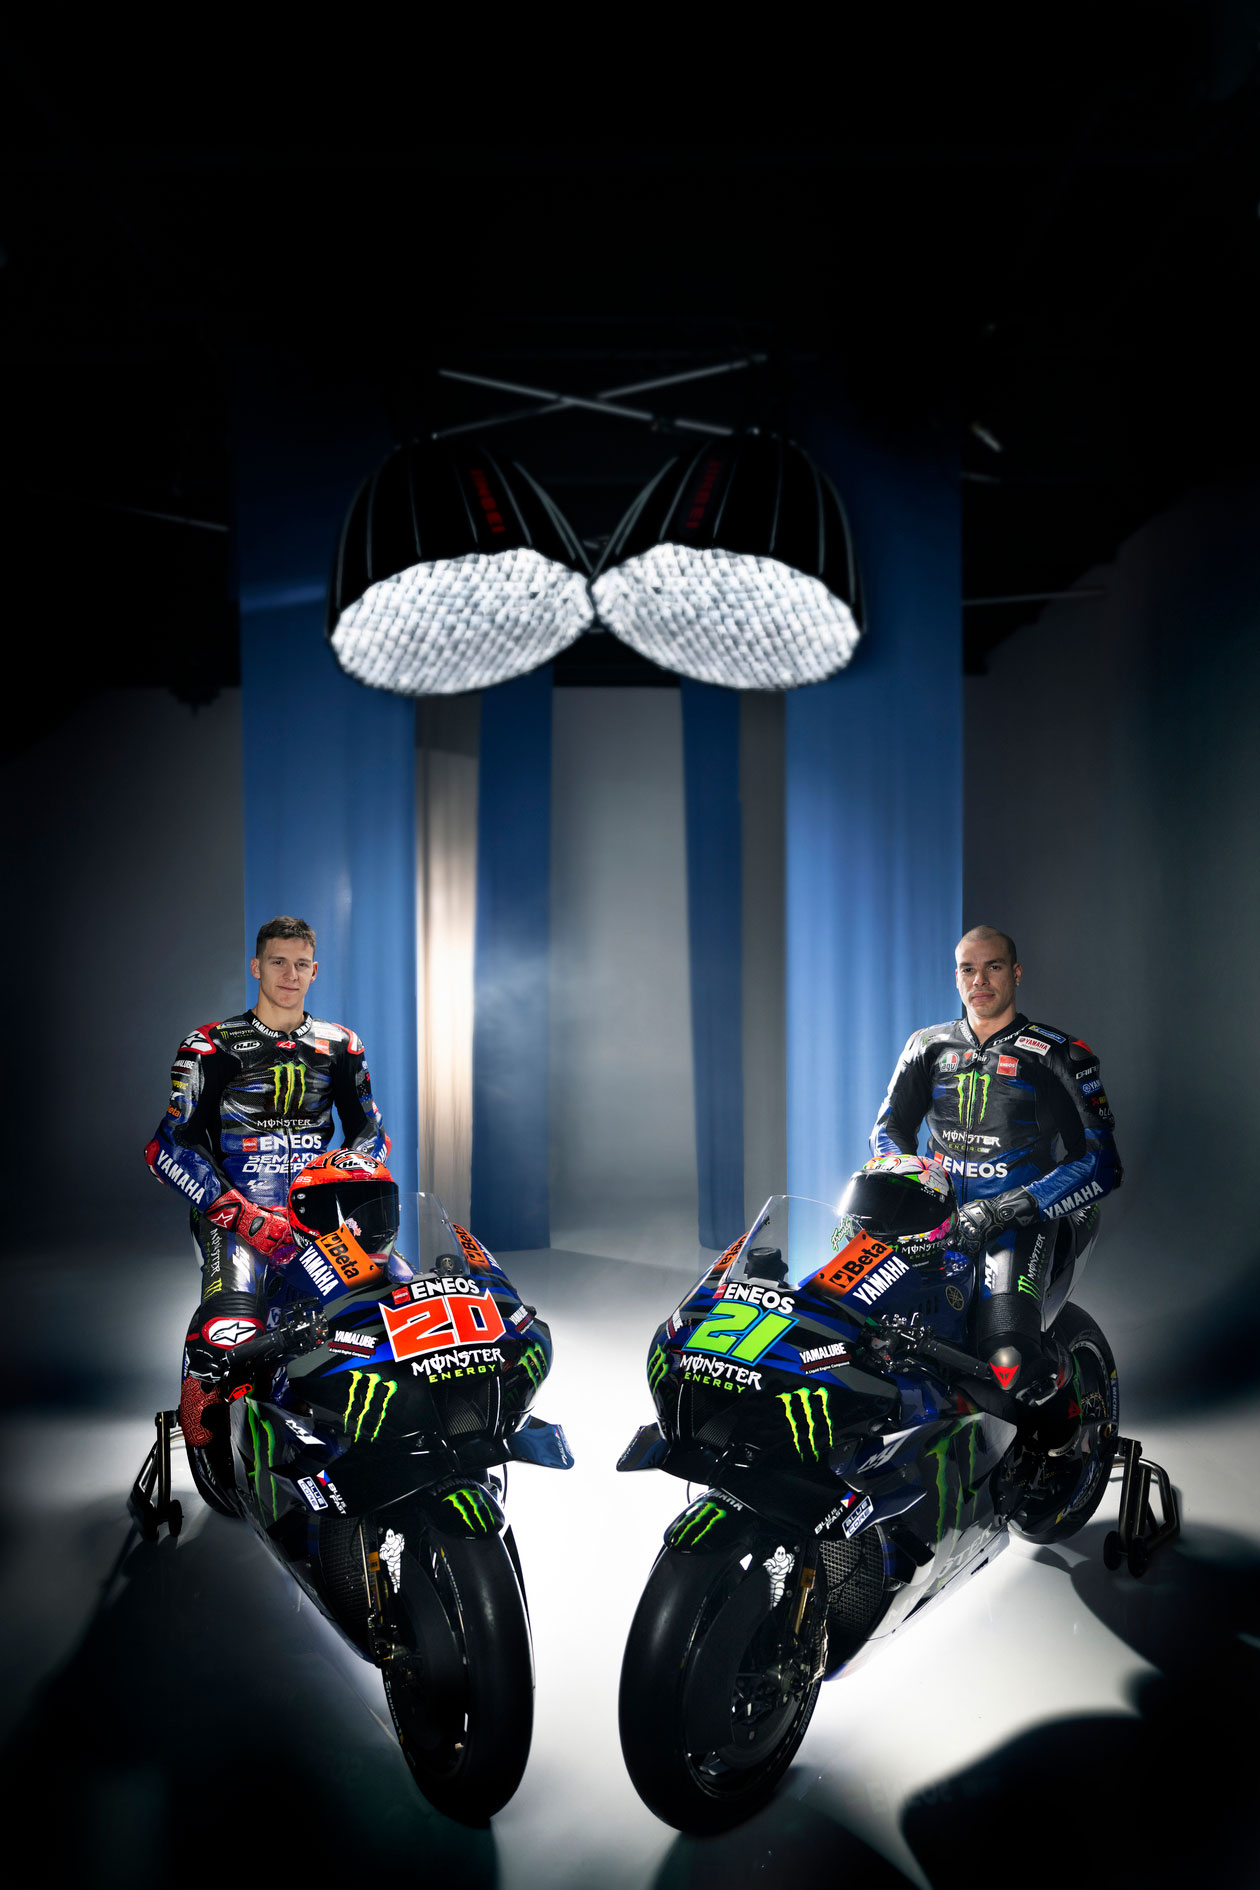 Team Livery members on bikes with spotlights